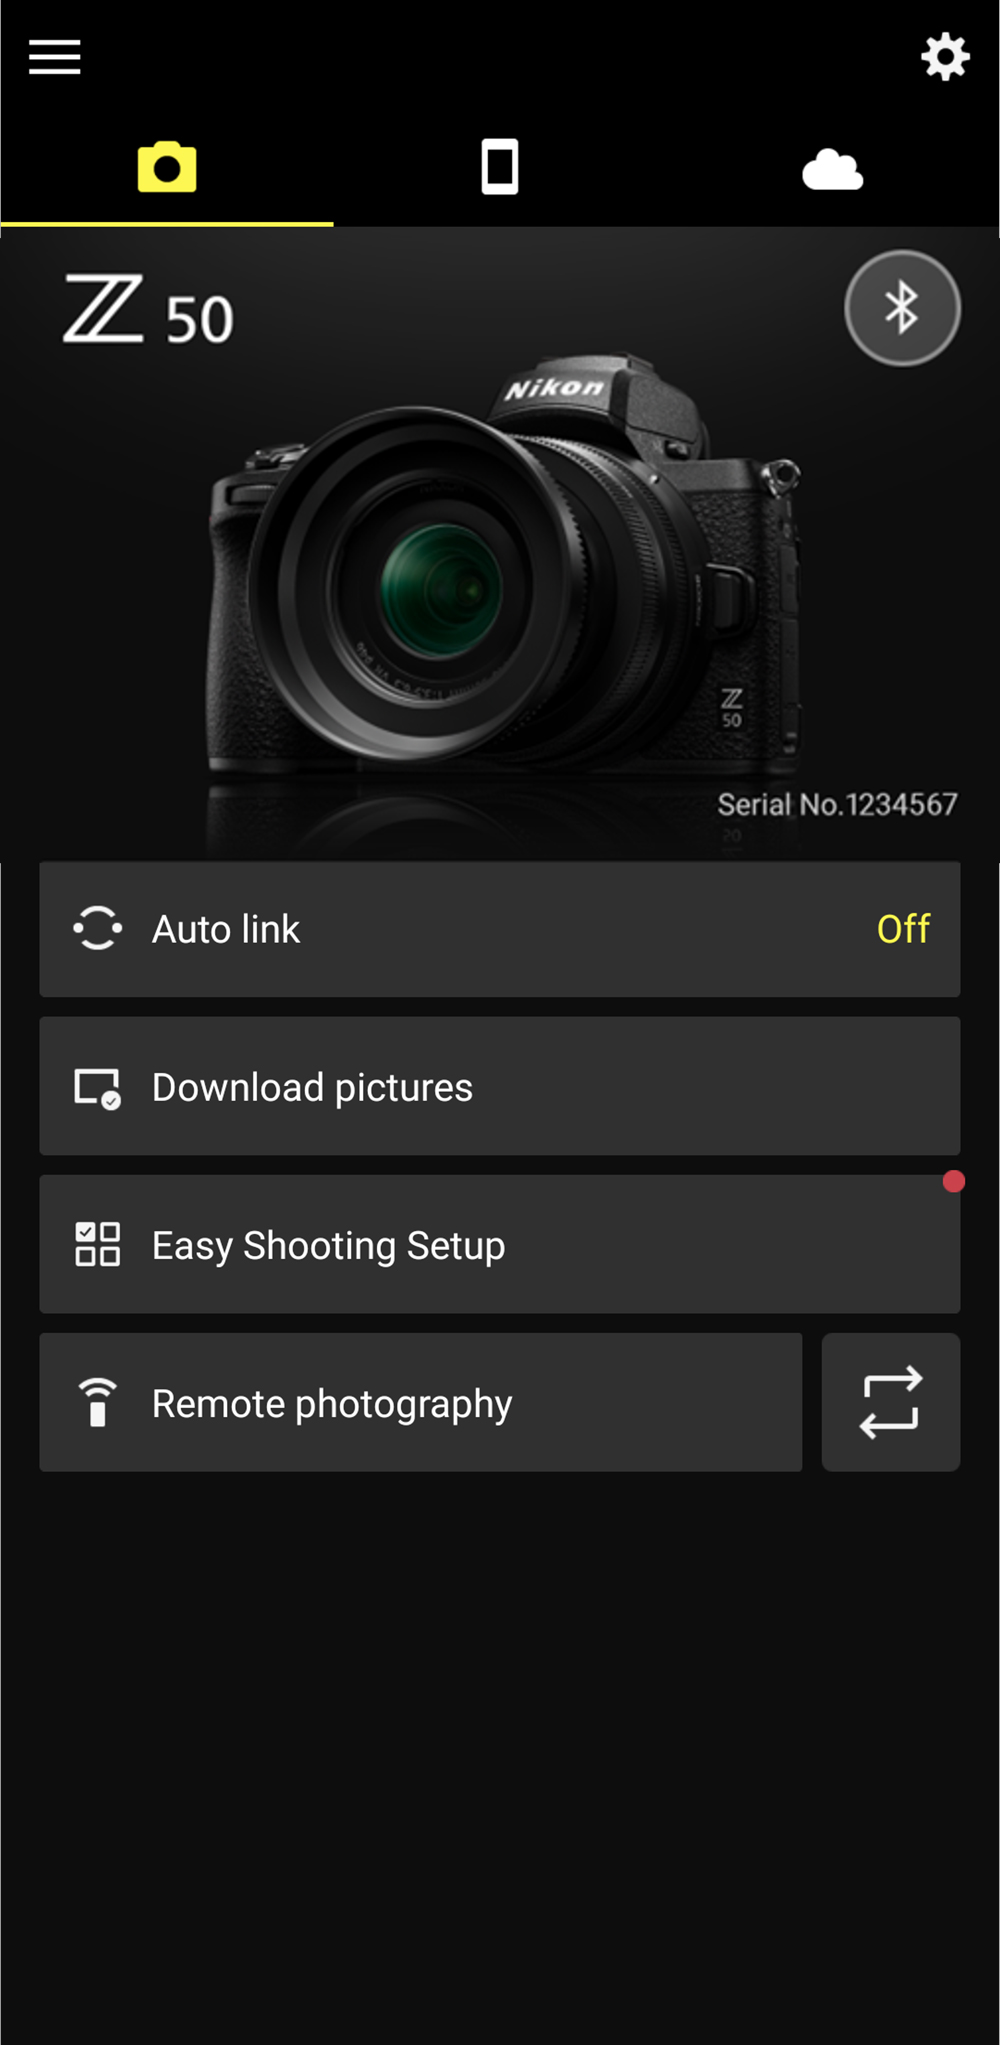 [Easy Shooting Setup] added to the home screen